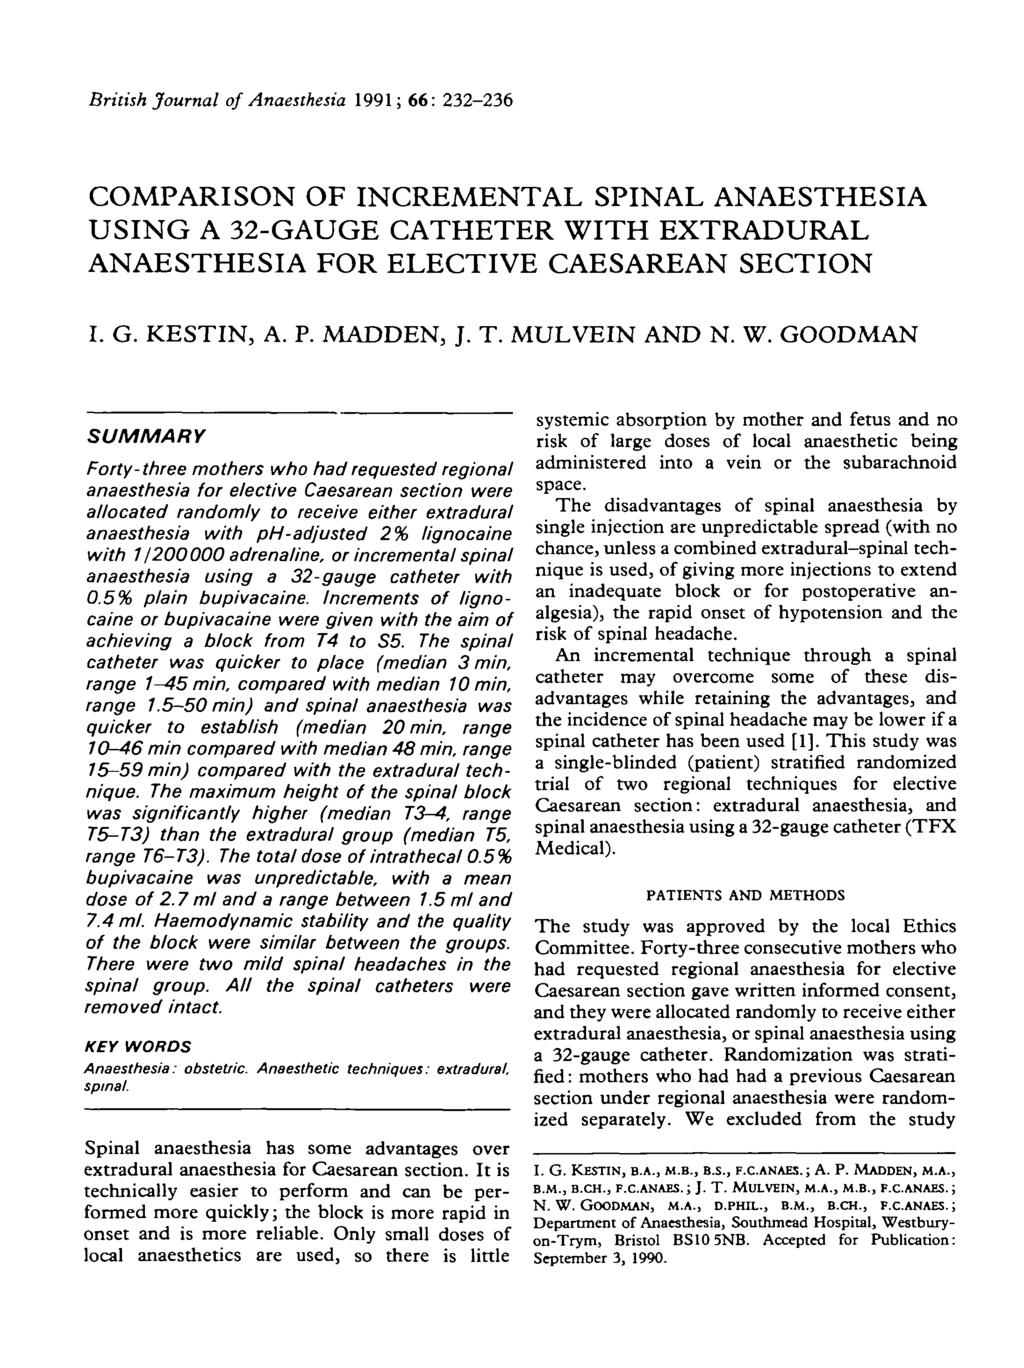 British Journal of Anaesthesia 1991; 66: 232-236 COMPARISON OF INCREMENTAL SPINAL ANAESTHESIA USING A 32-GAUGE CATHETER WITH EXTRADURAL ANAESTHESIA FOR ELECTIVE CAESAREAN SECTION I. G. KESTIN, A. P.